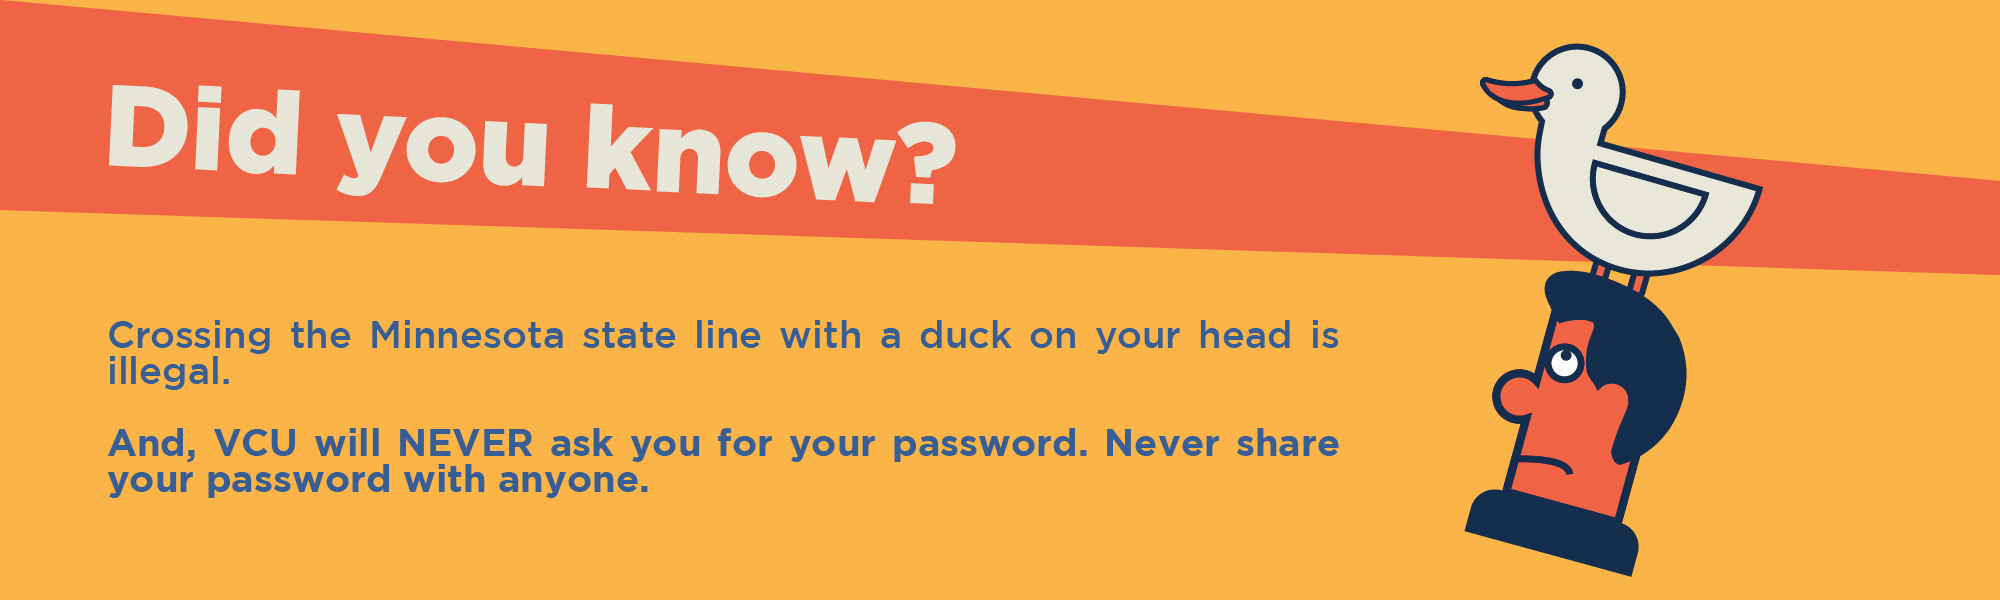 Did you know? Crossing the Minnesota State line with a duck on your head is illegal. And, VCU will never ask you for your password. Never share your password with anyone.